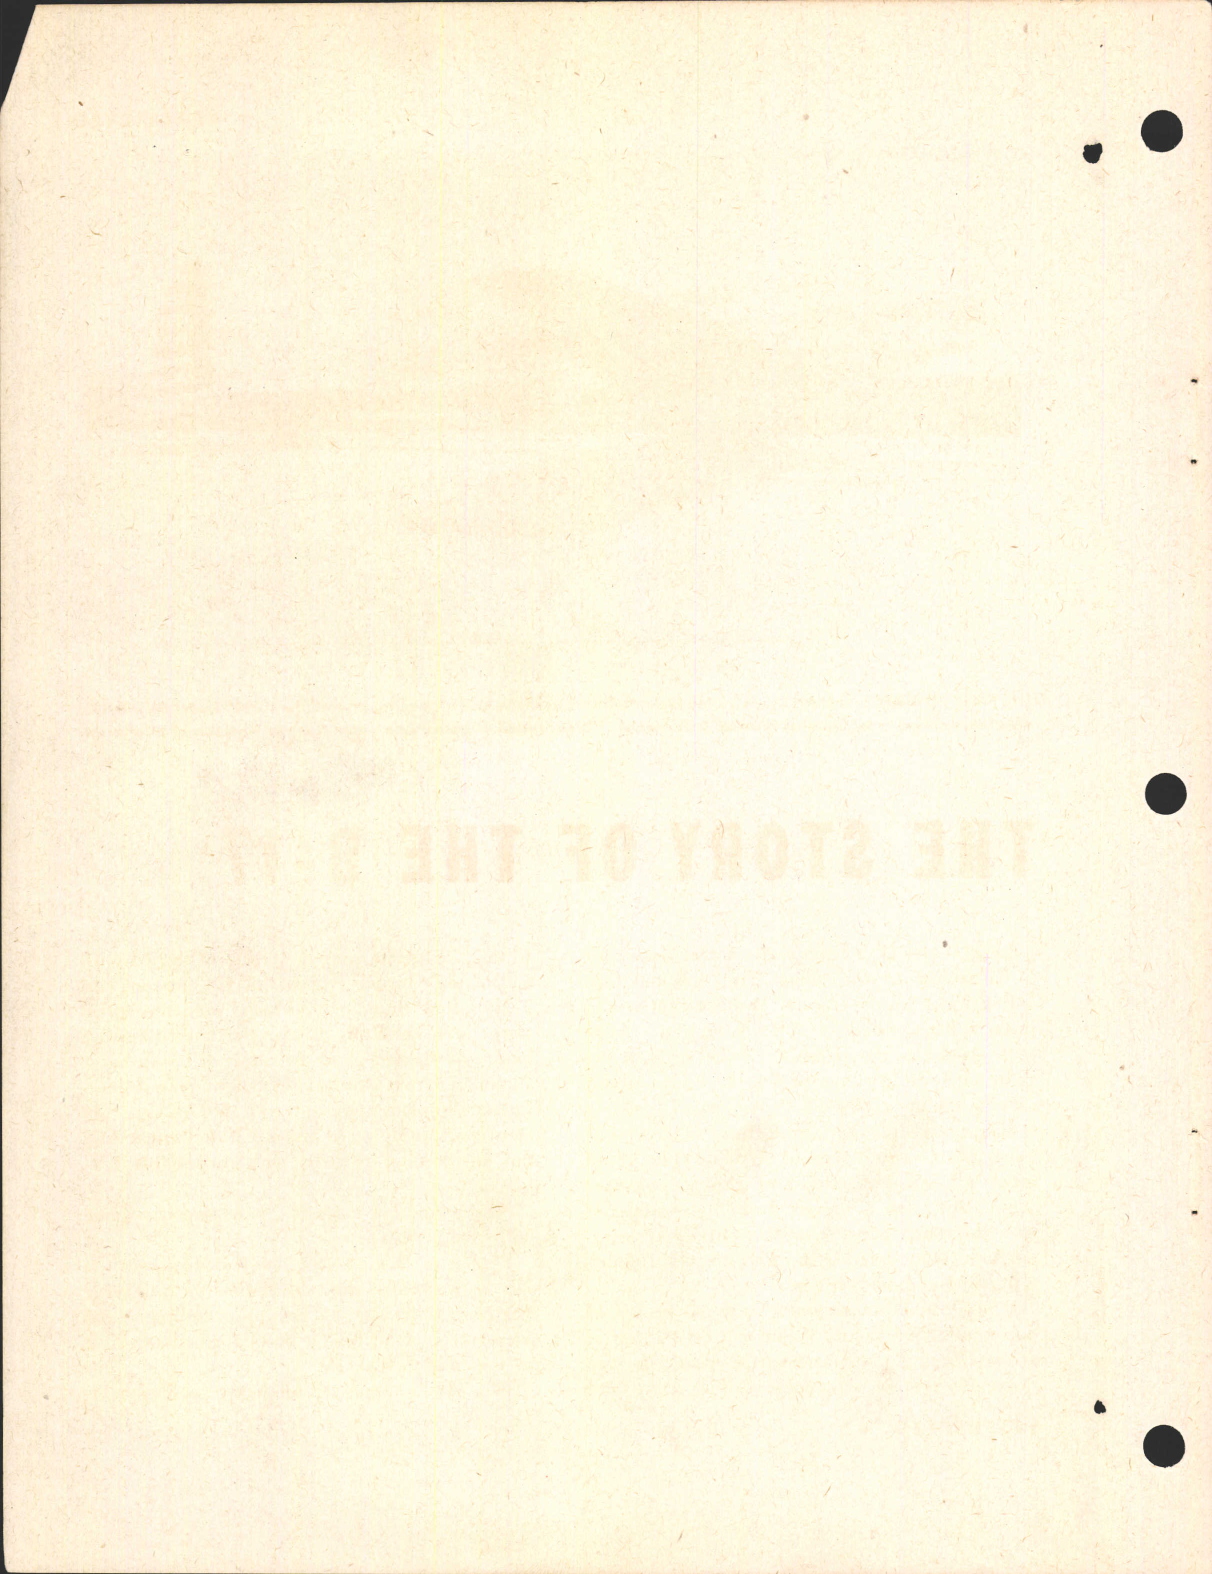 Sample page 6 from AirCorps Library document: Pilot Training Manual for the B-17 Flying Fortress